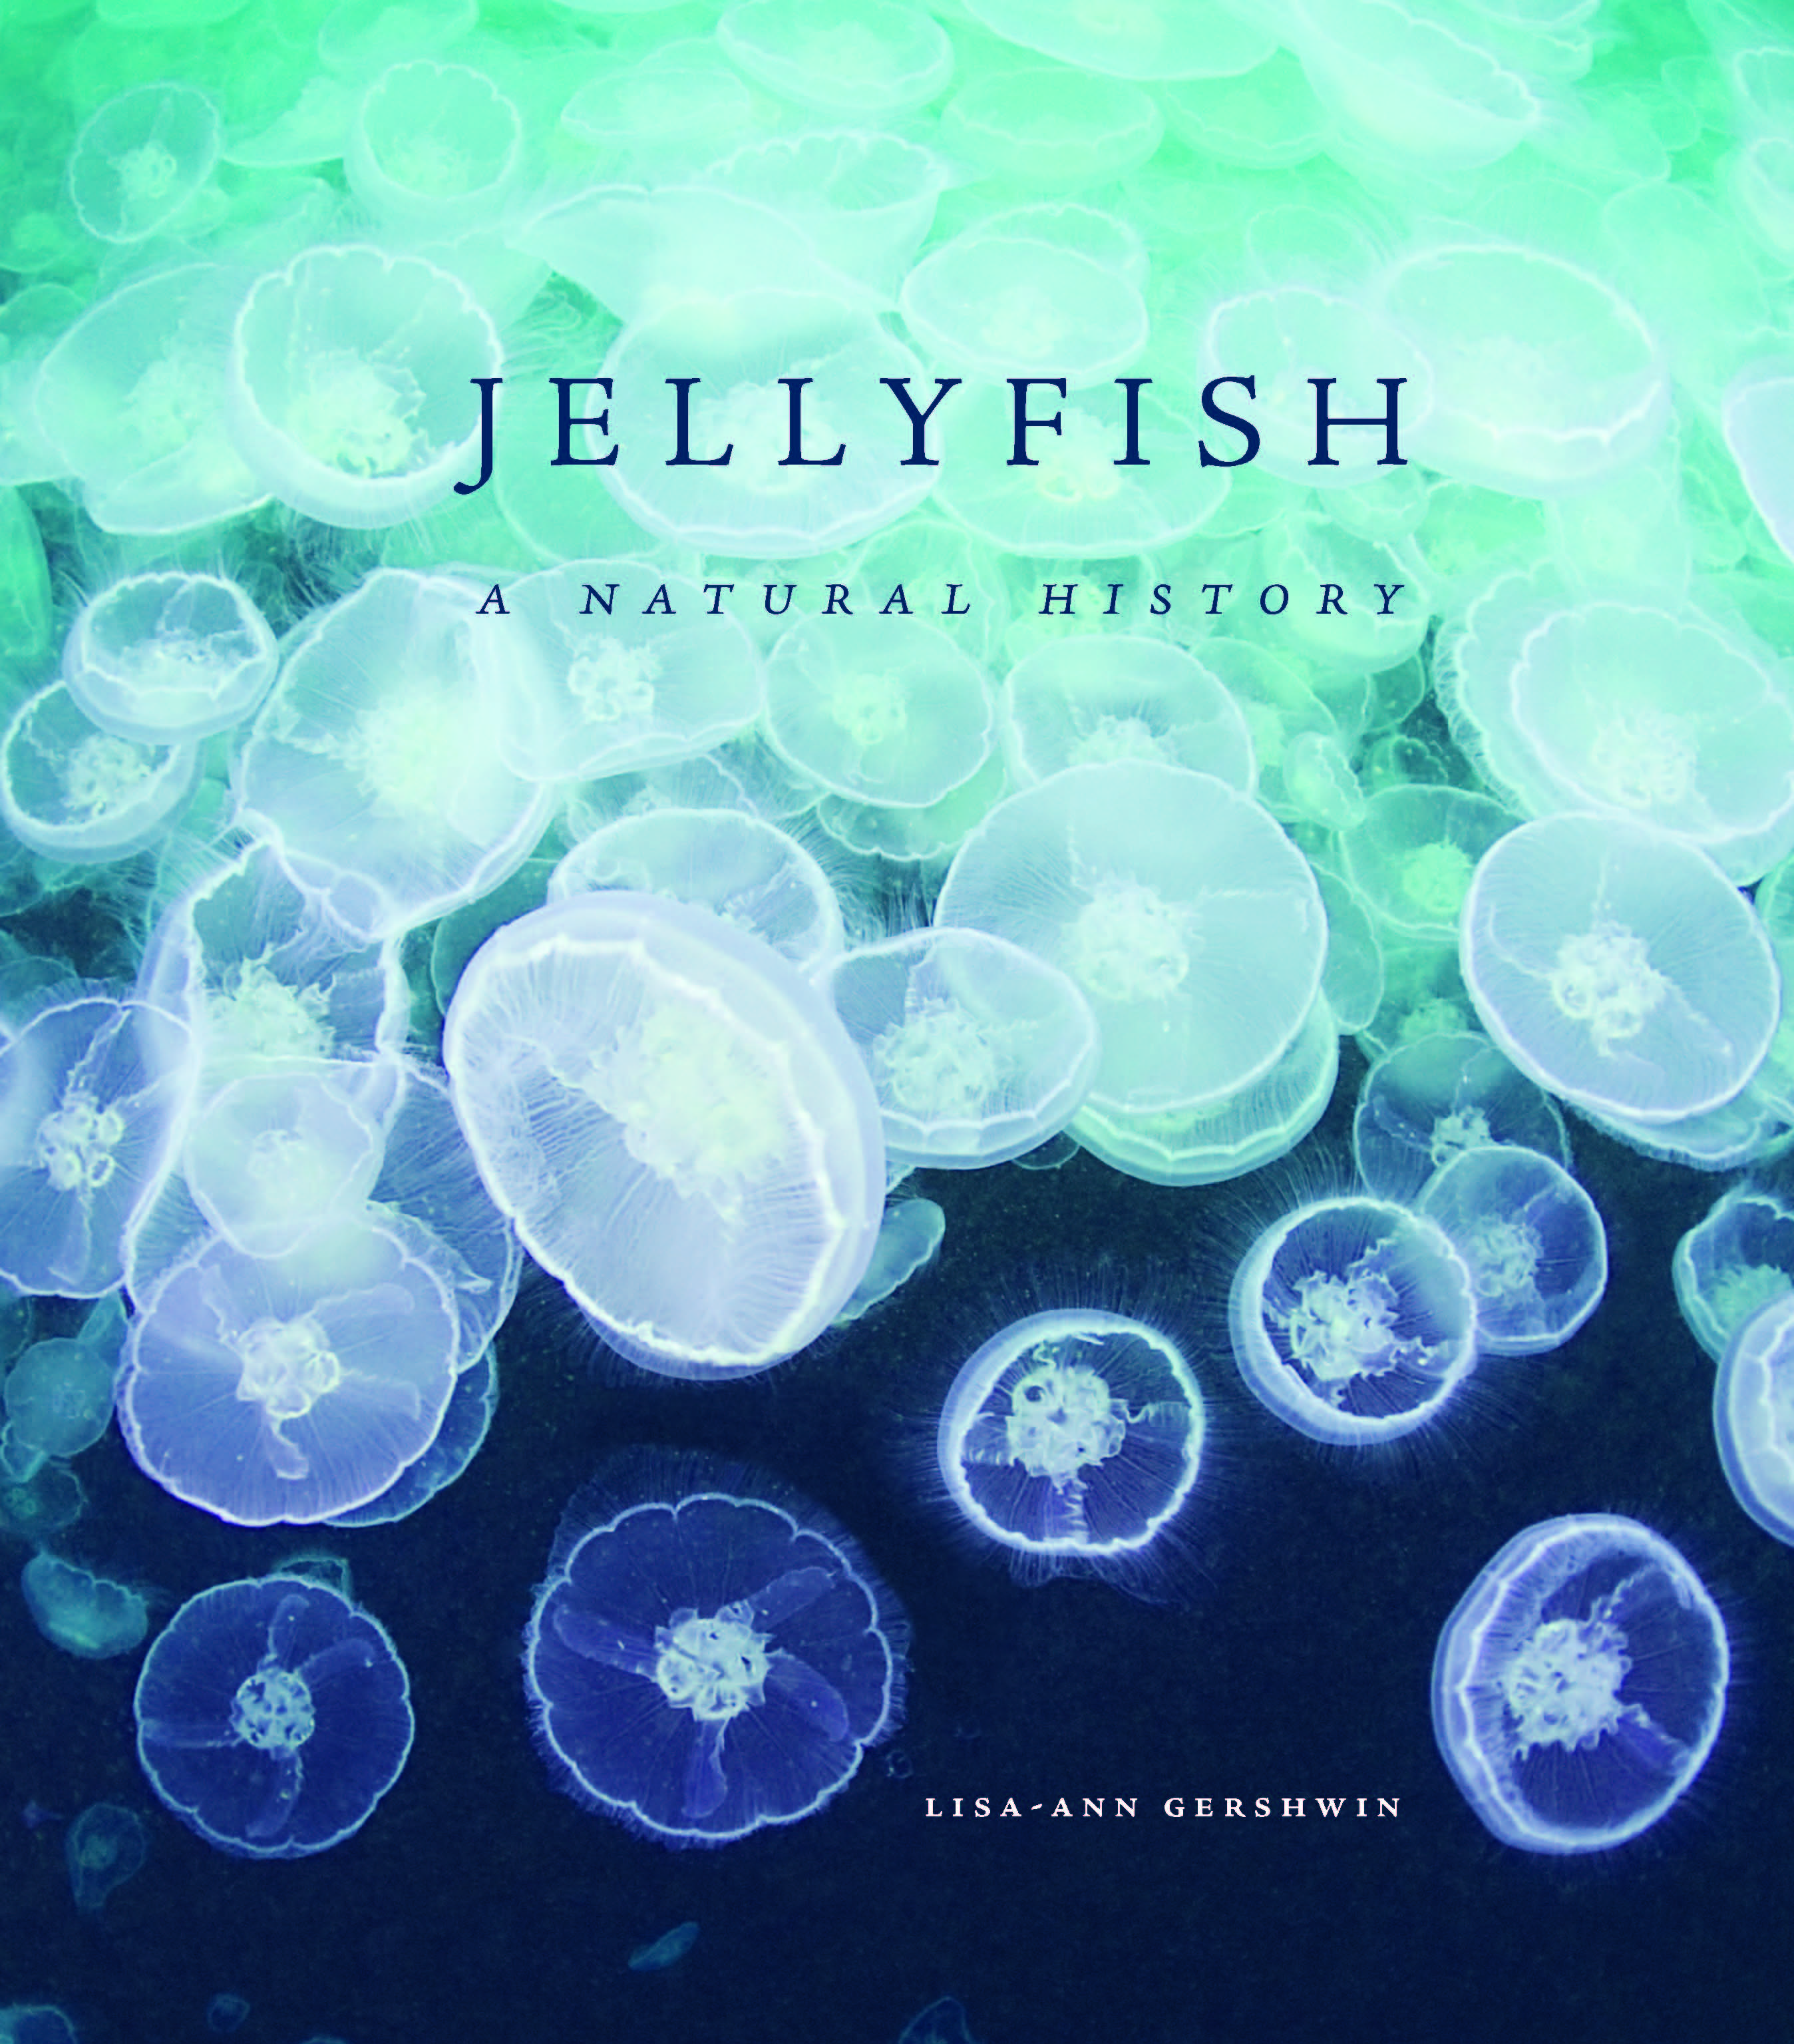 The Jellyfish Device by William Marshall